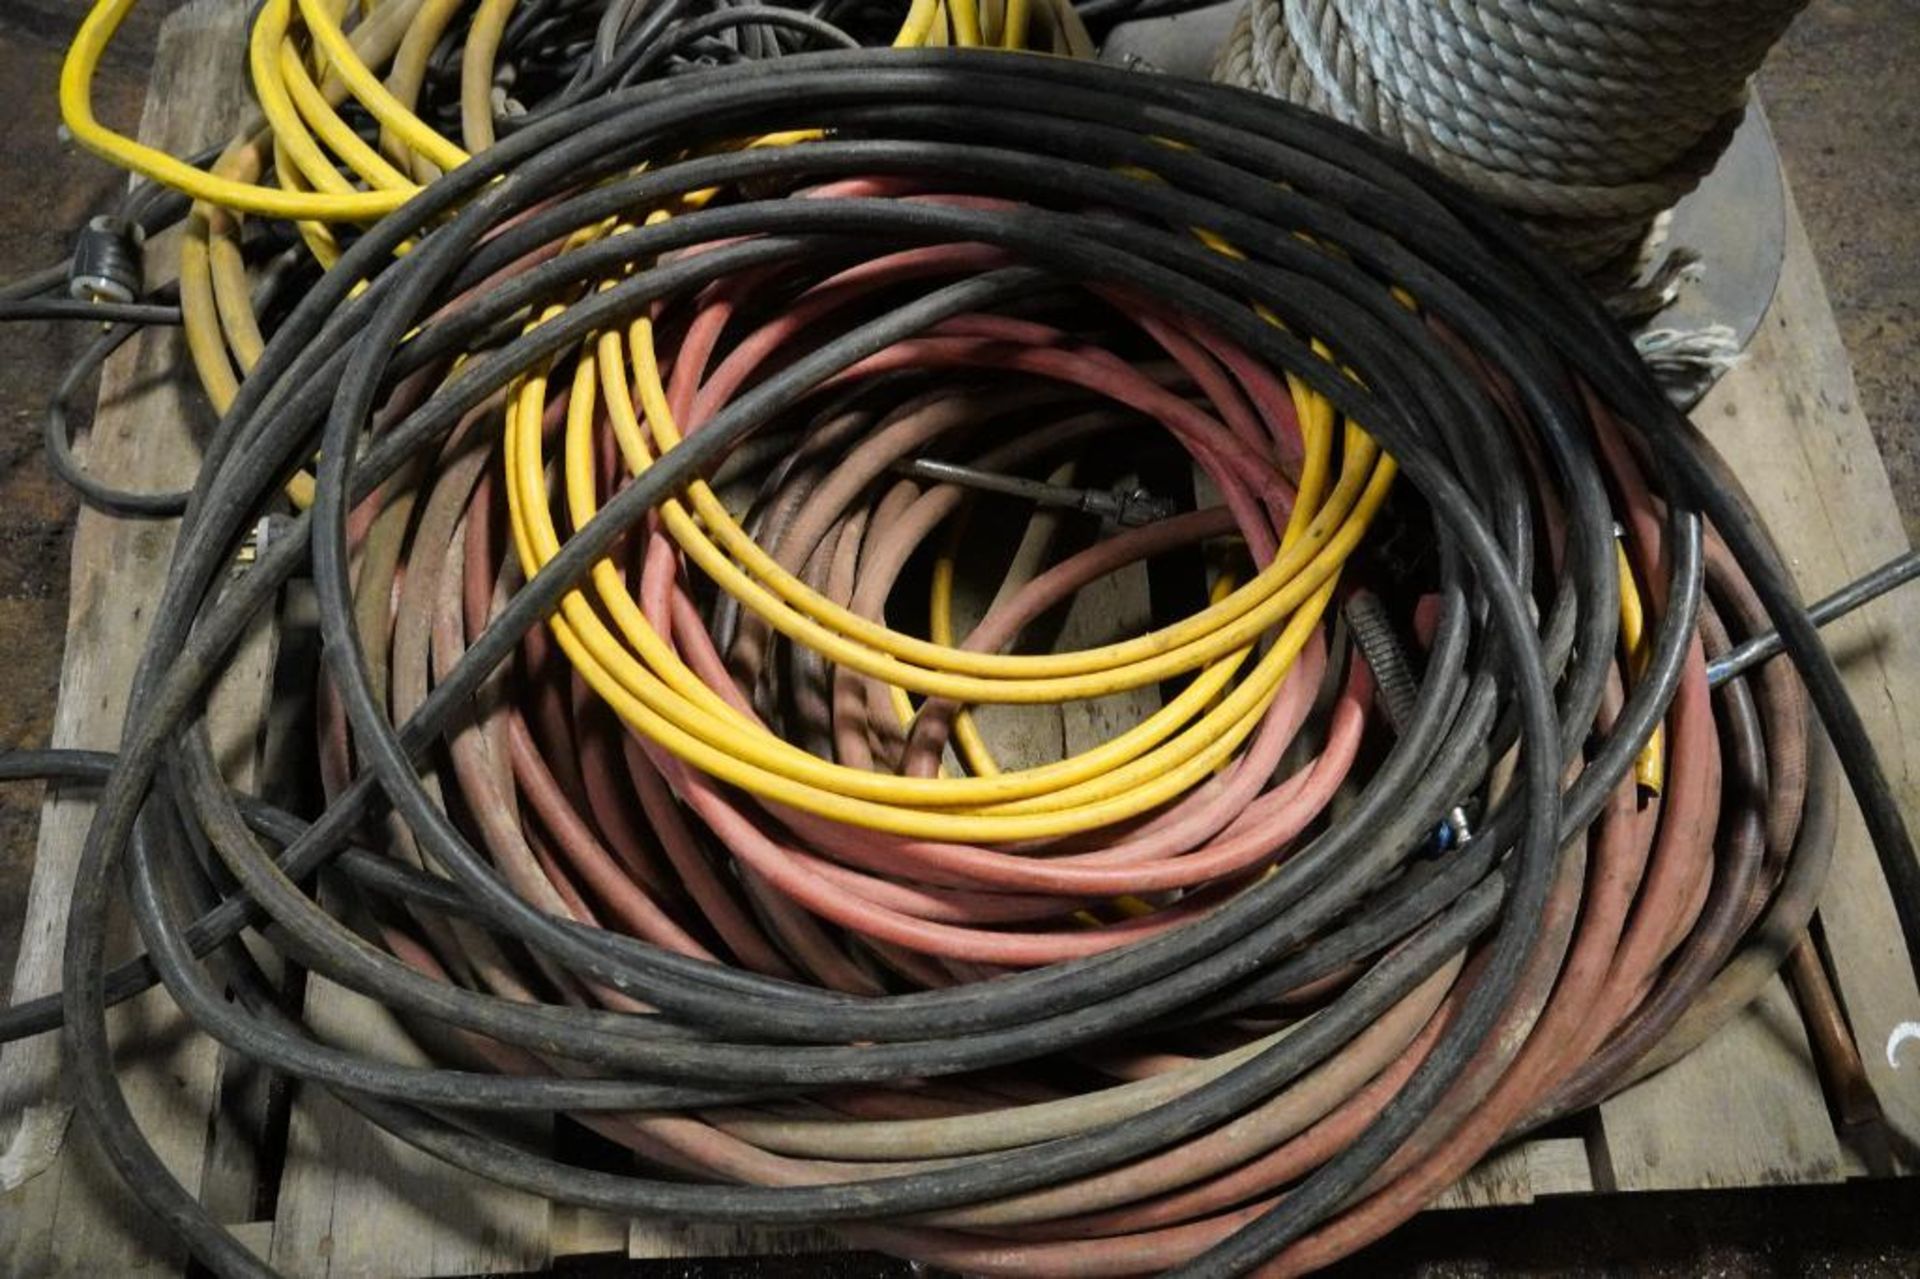 Air Hoses, Extension Cords, & Rope - Image 5 of 7